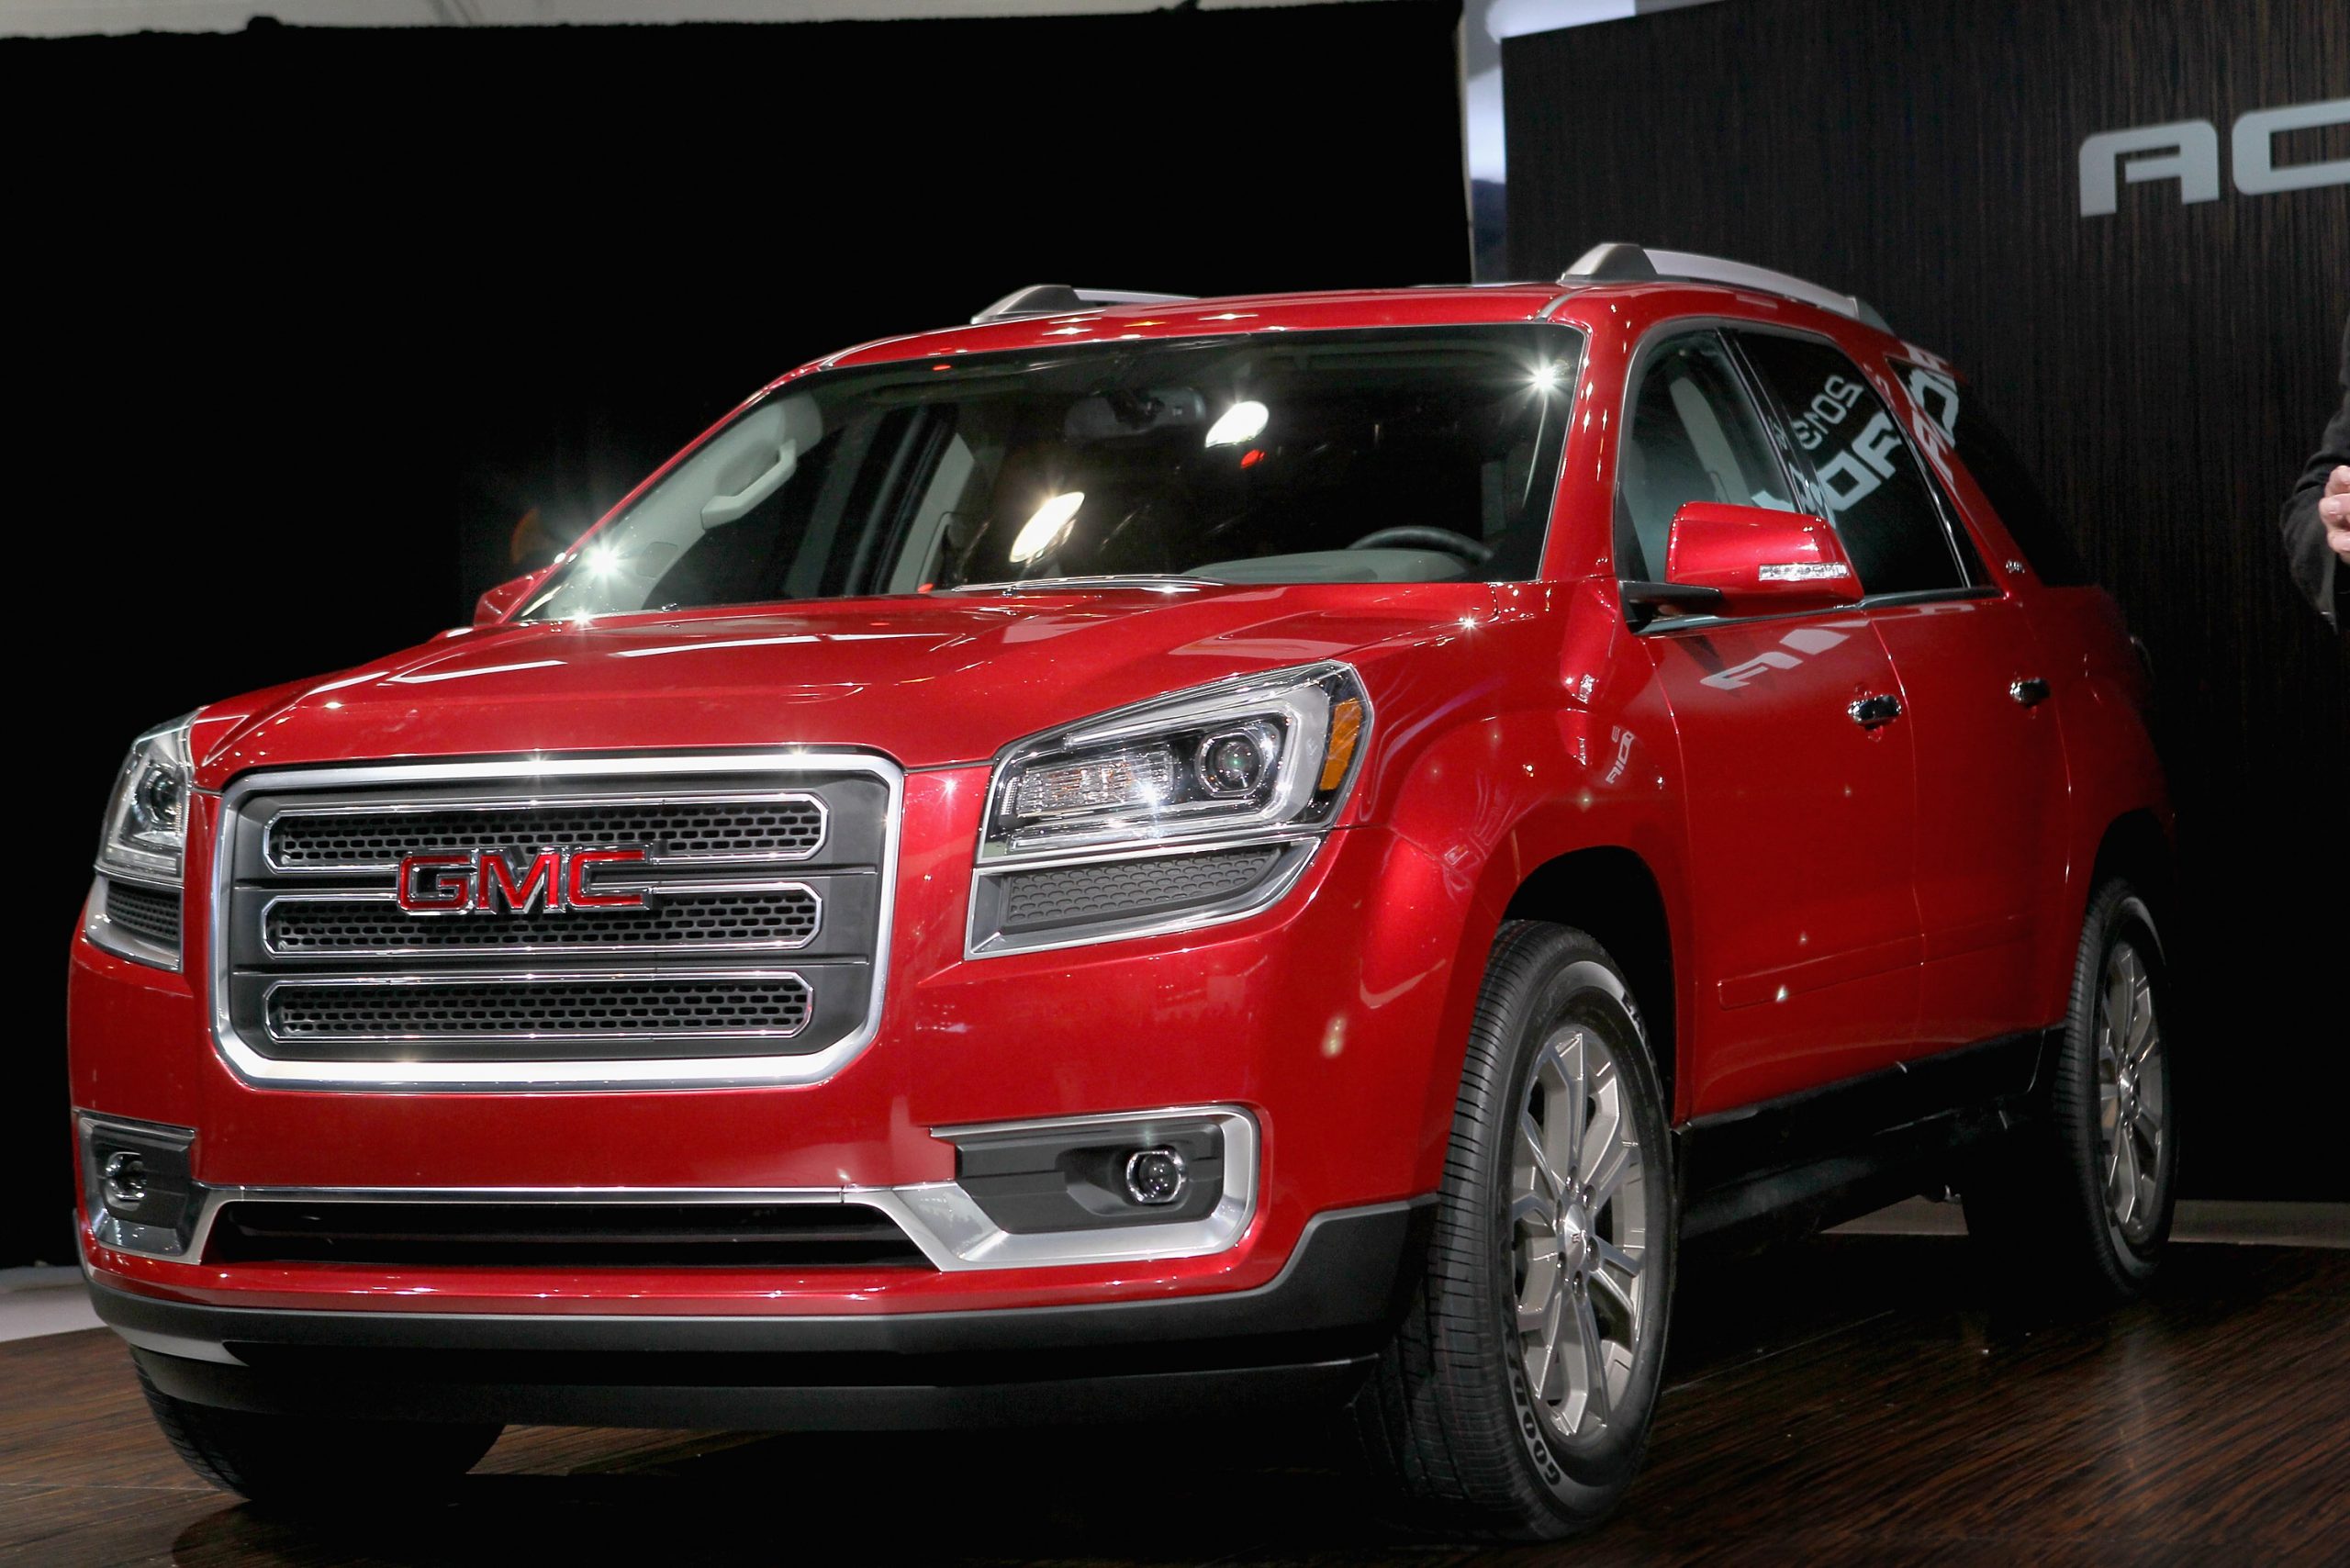 A red GMC Acadia on display